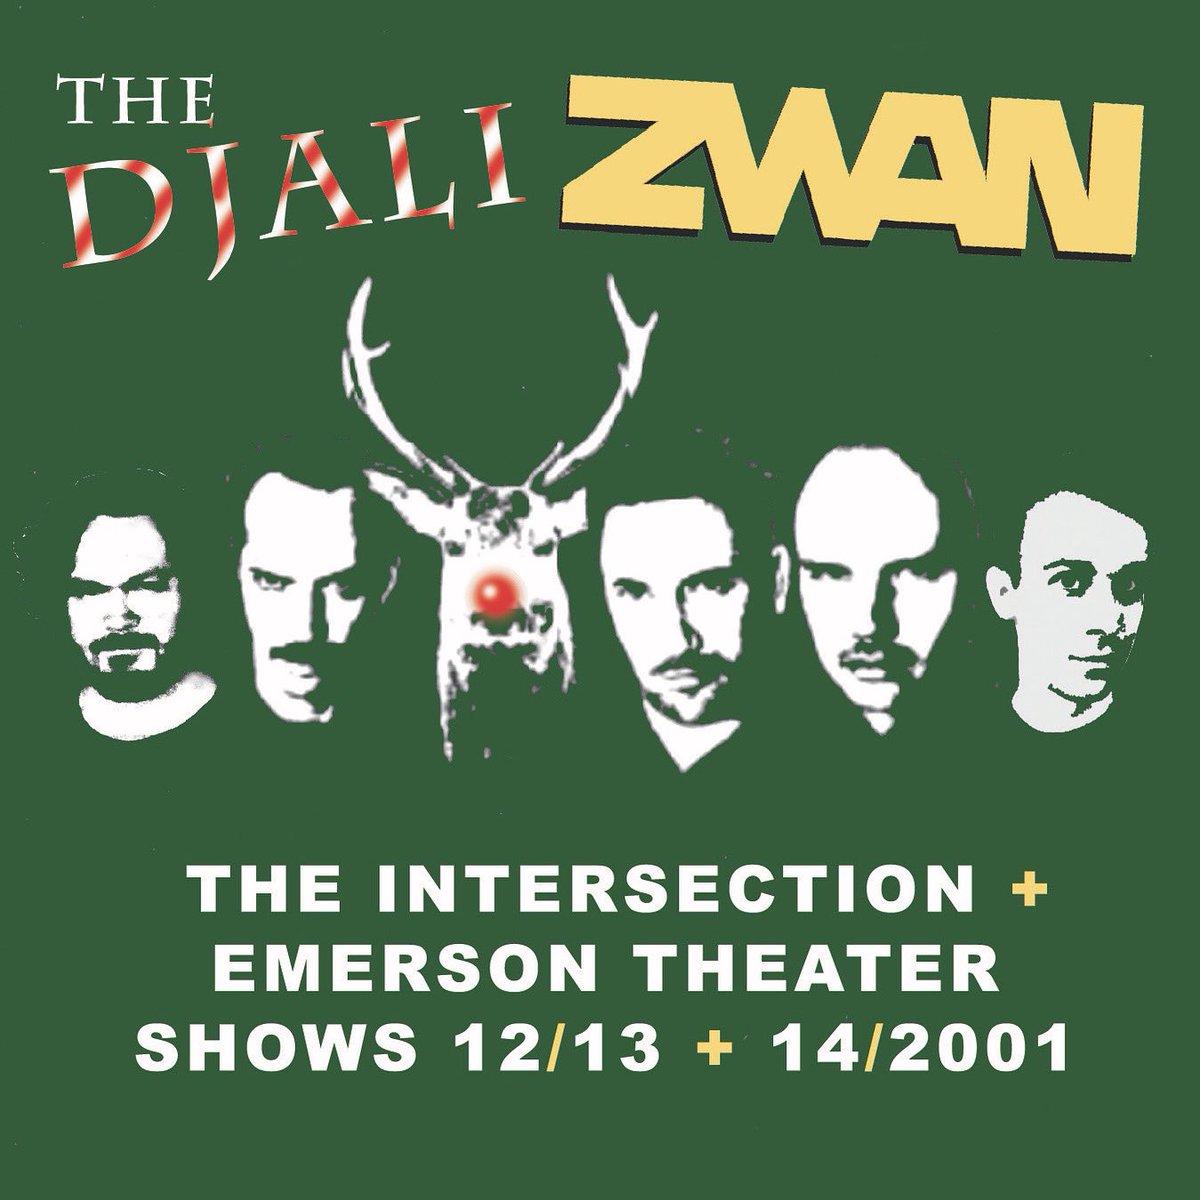 OUT NOW! We talk DJALI ZWAN: The Intersection & Emerson Theater Shows (12/13 & 14, 2001)

HAVE A HOLLY DJALI XMAS, PUMPKINHEADS! 

Links to shows available in show notes wherever you listen to this podcast. 
#zwan #djalizwan #billycorgan #jimmychamberlin #davidpajo #mattsweeney